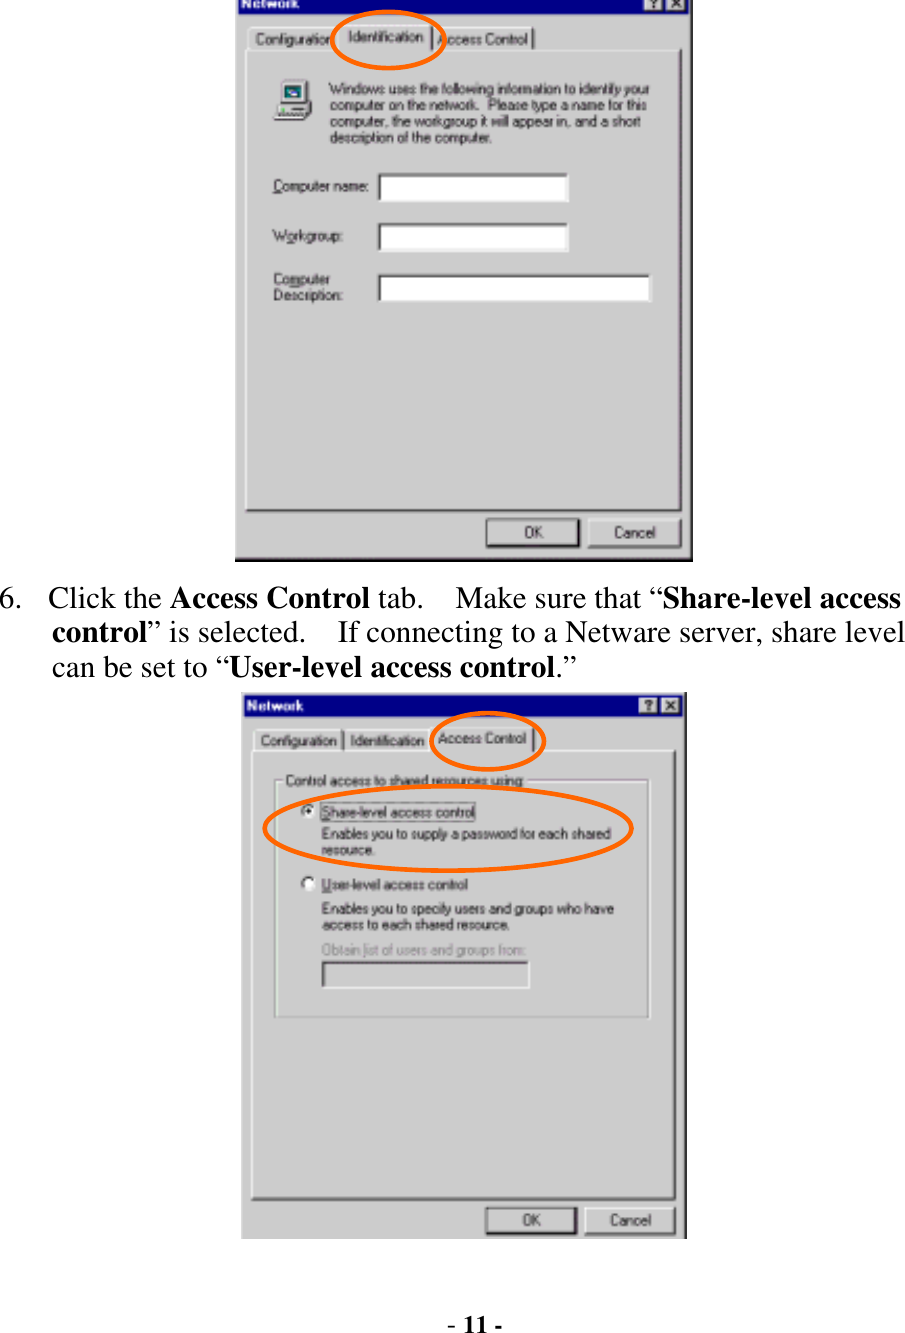  - 11 -  6. Click the Access Control tab.    Make sure that “Share-level access control” is selected.    If connecting to a Netware server, share level can be set to “User-level access control.”   